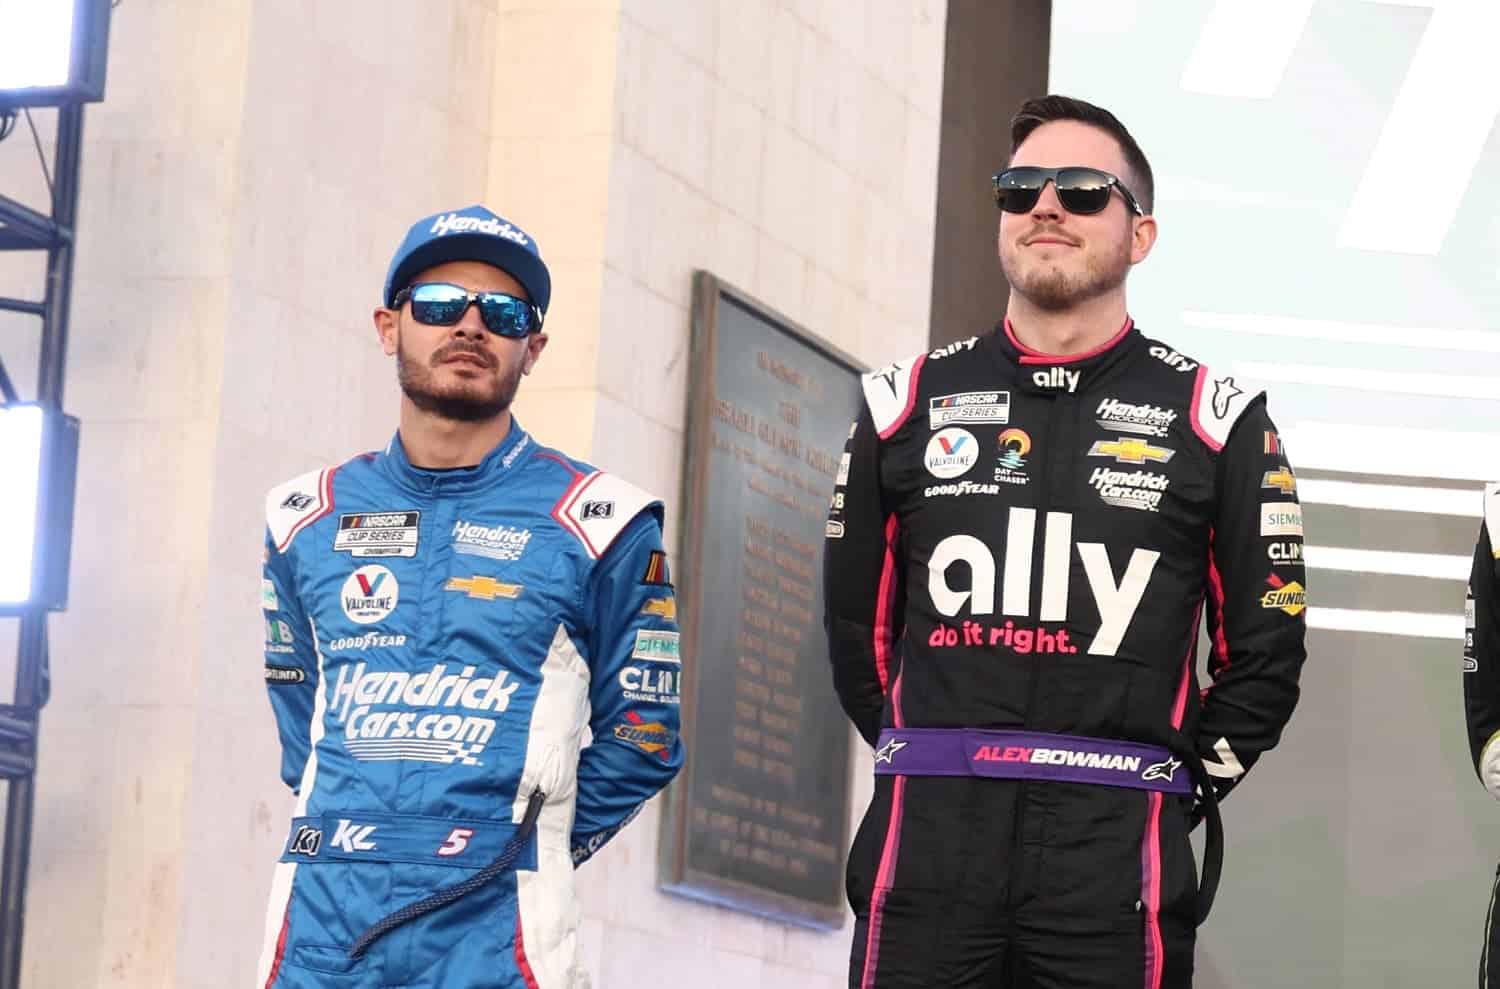 Hendrick Motorsports drivers Kyle Larson and Alex Bowman during ceremonies before the Busch Light Clash at the Los Angeles Coliseum on Feb. 5, 2023. | Joe Scarnici/Getty Images